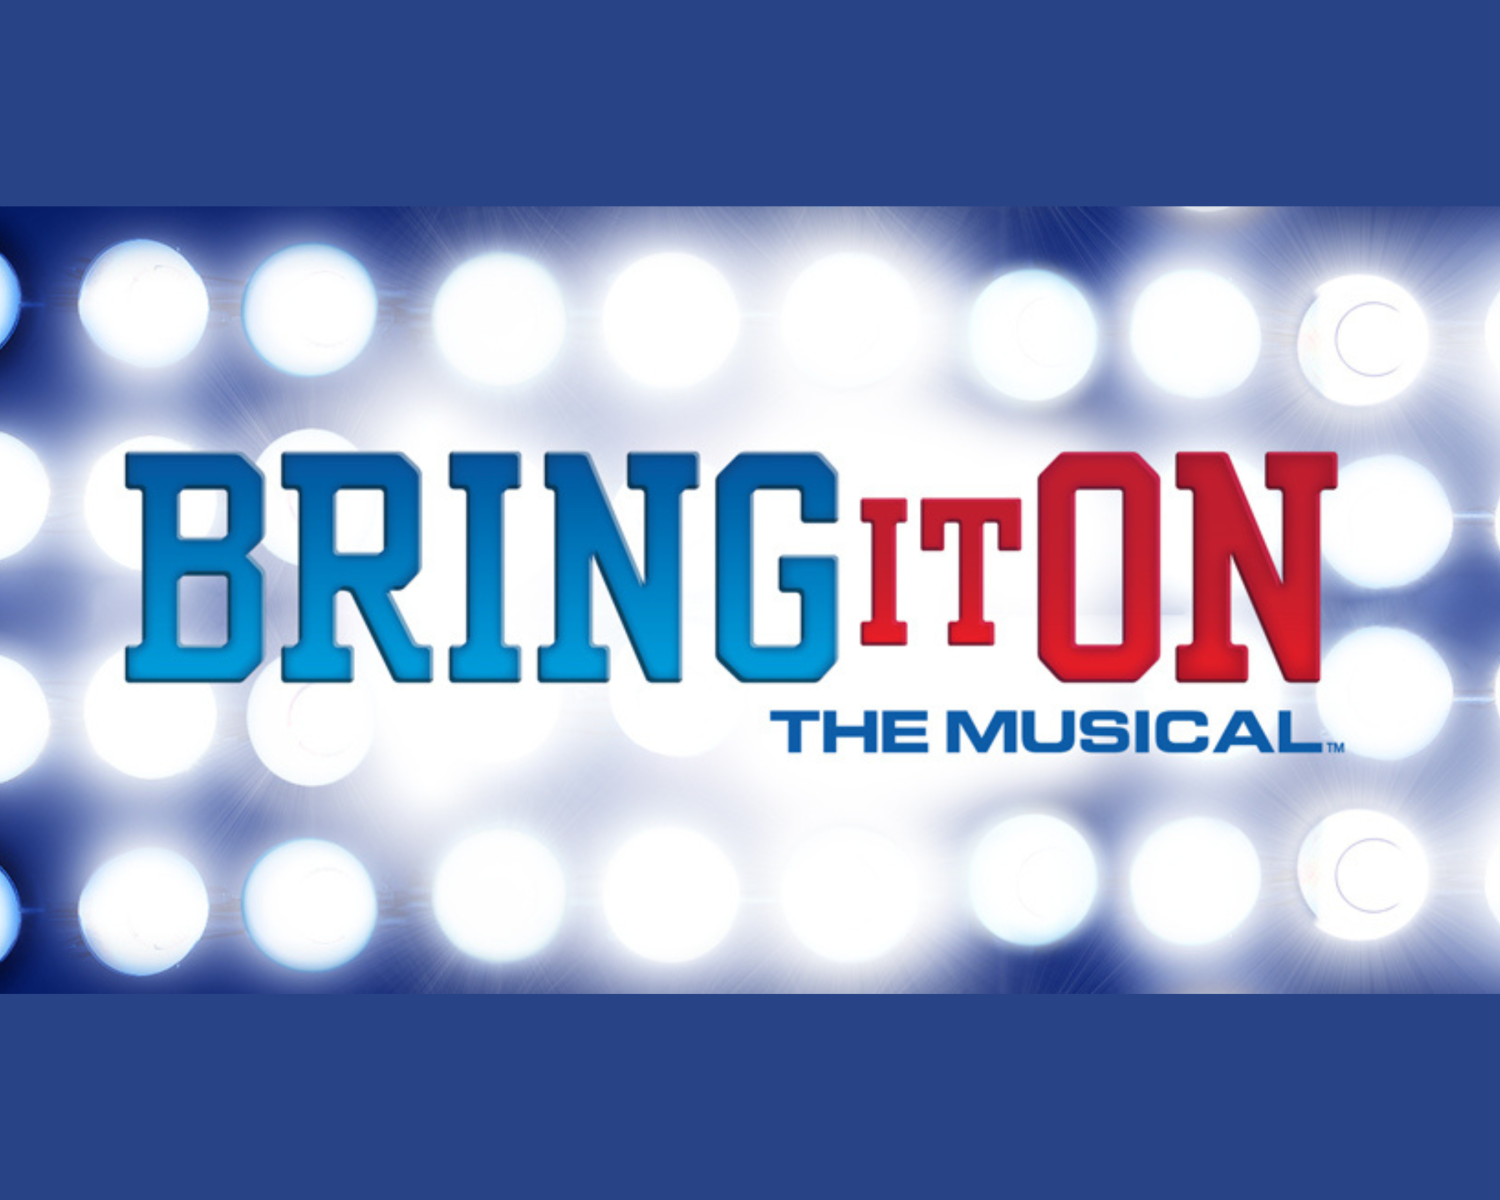 bring it on the musical logo with circle lights and blue background